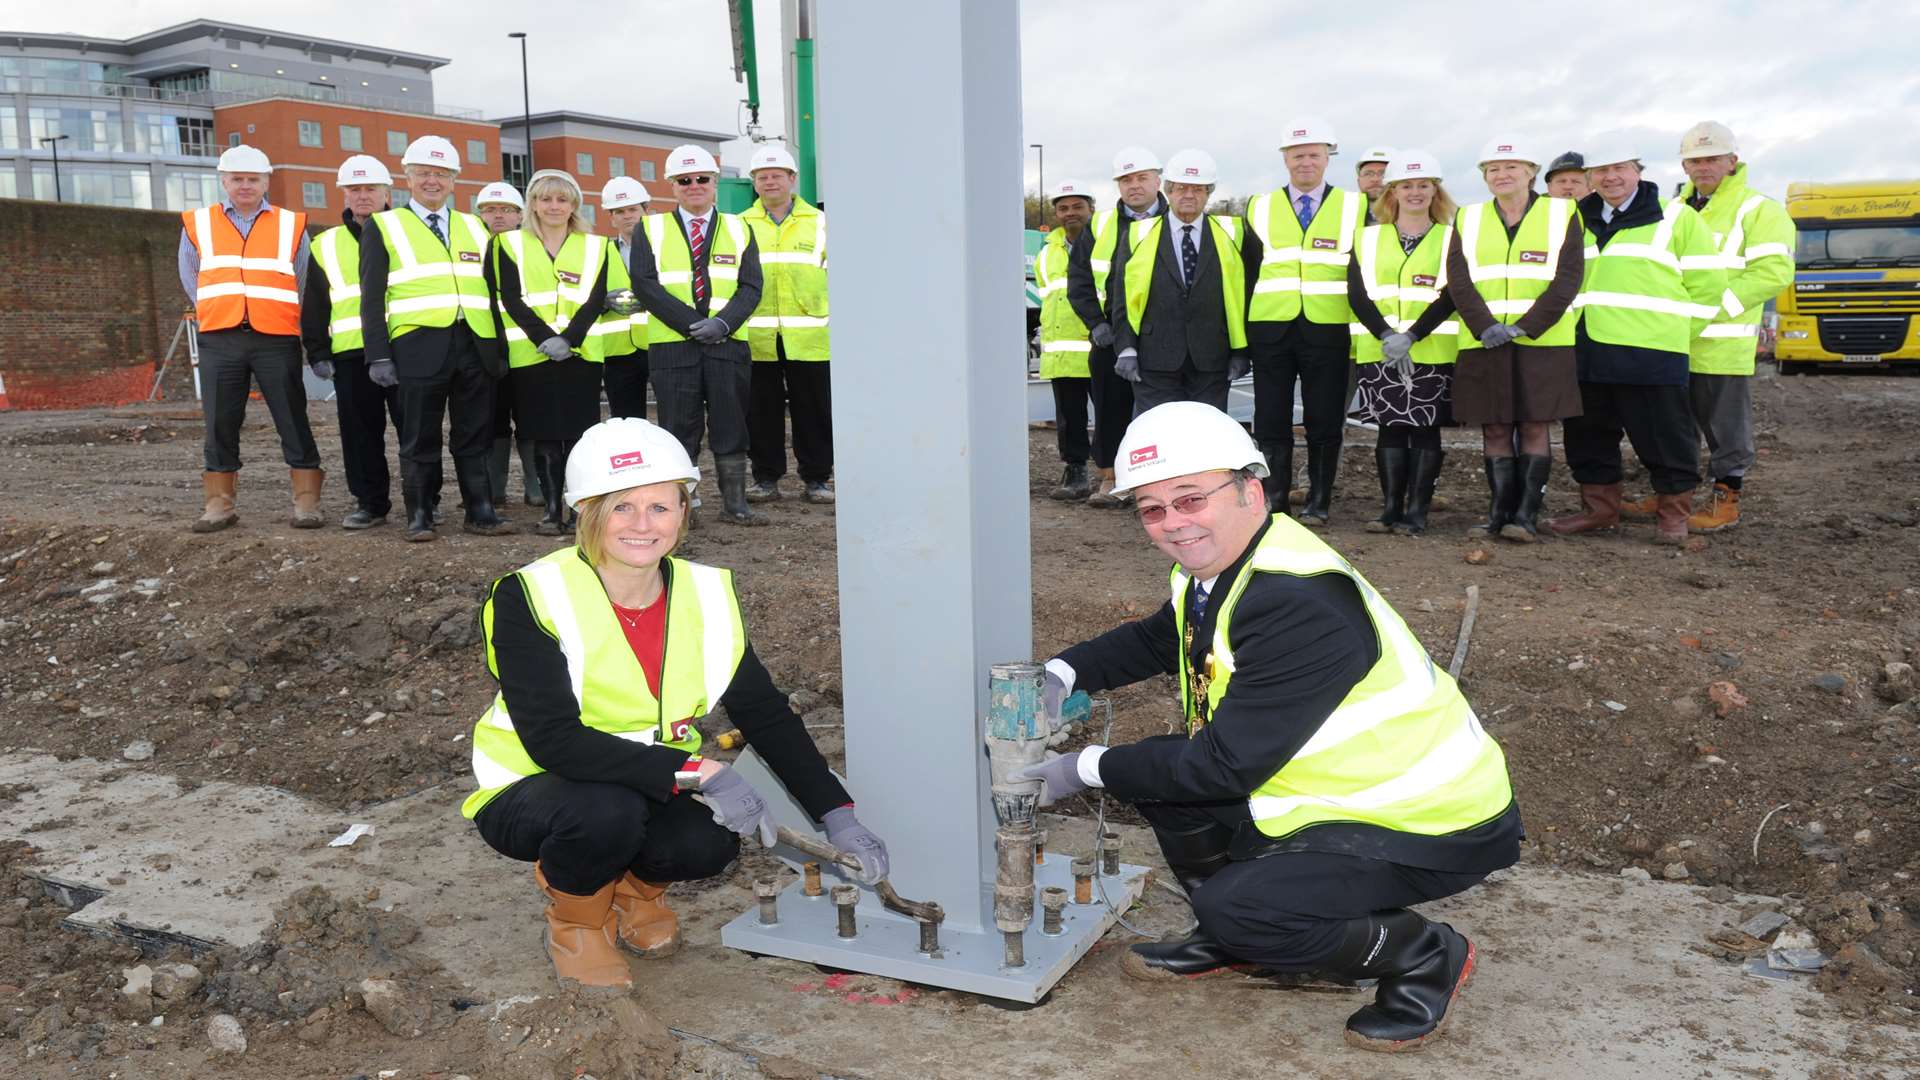 The building site of Medway's new University Technical College, Principal Dr Karon Buck and Mayor of Medway Cllr Barry Kemp, 'helping' with the building work.